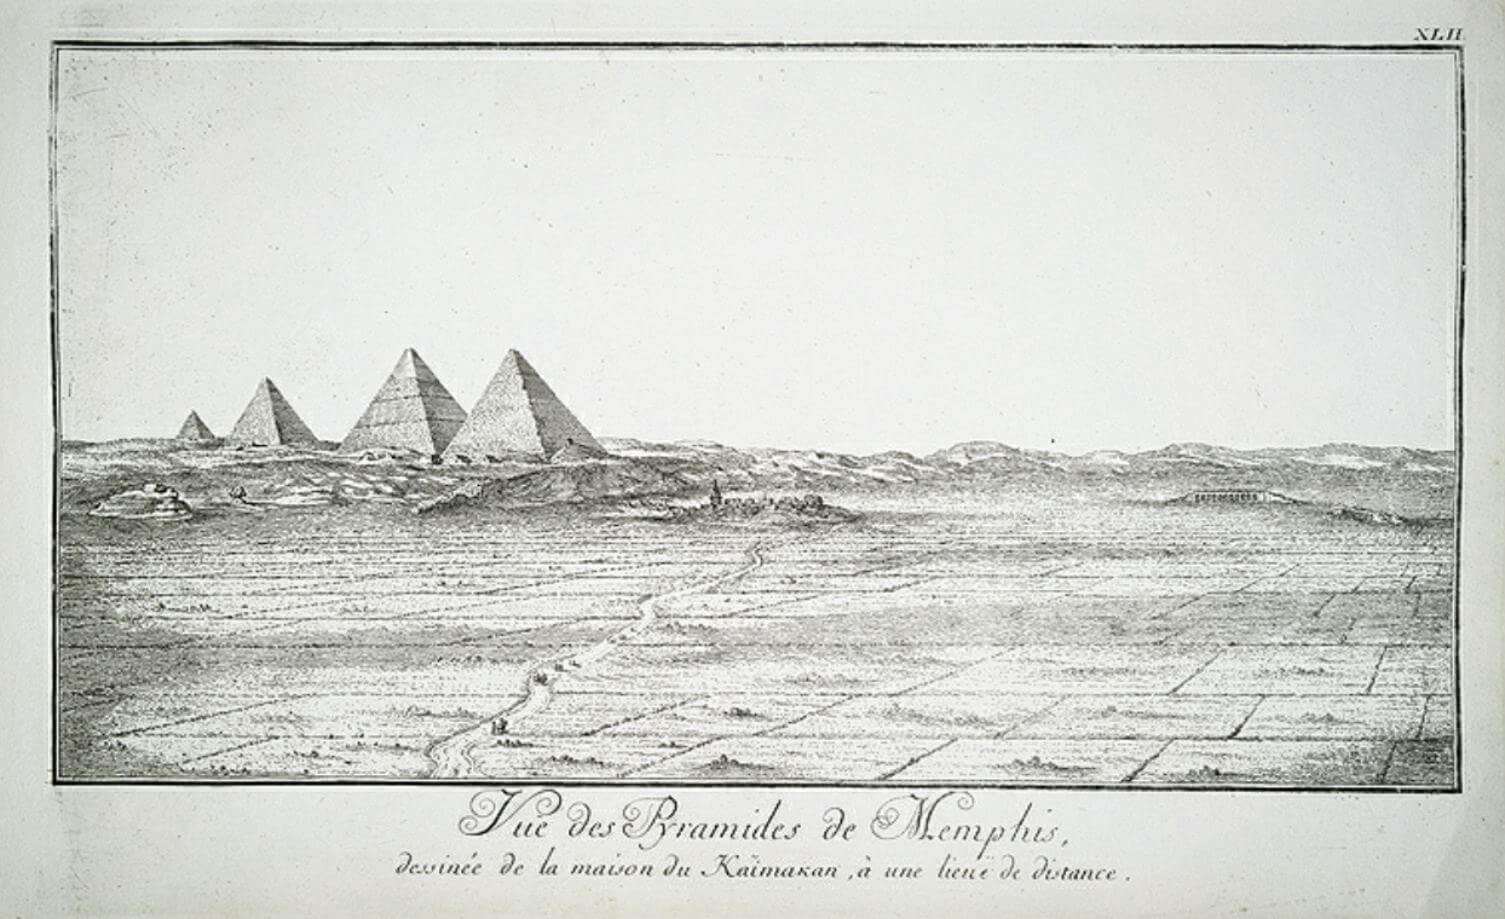 Norden’s sketch from the 1700s showing 4 pyramids at Giza.